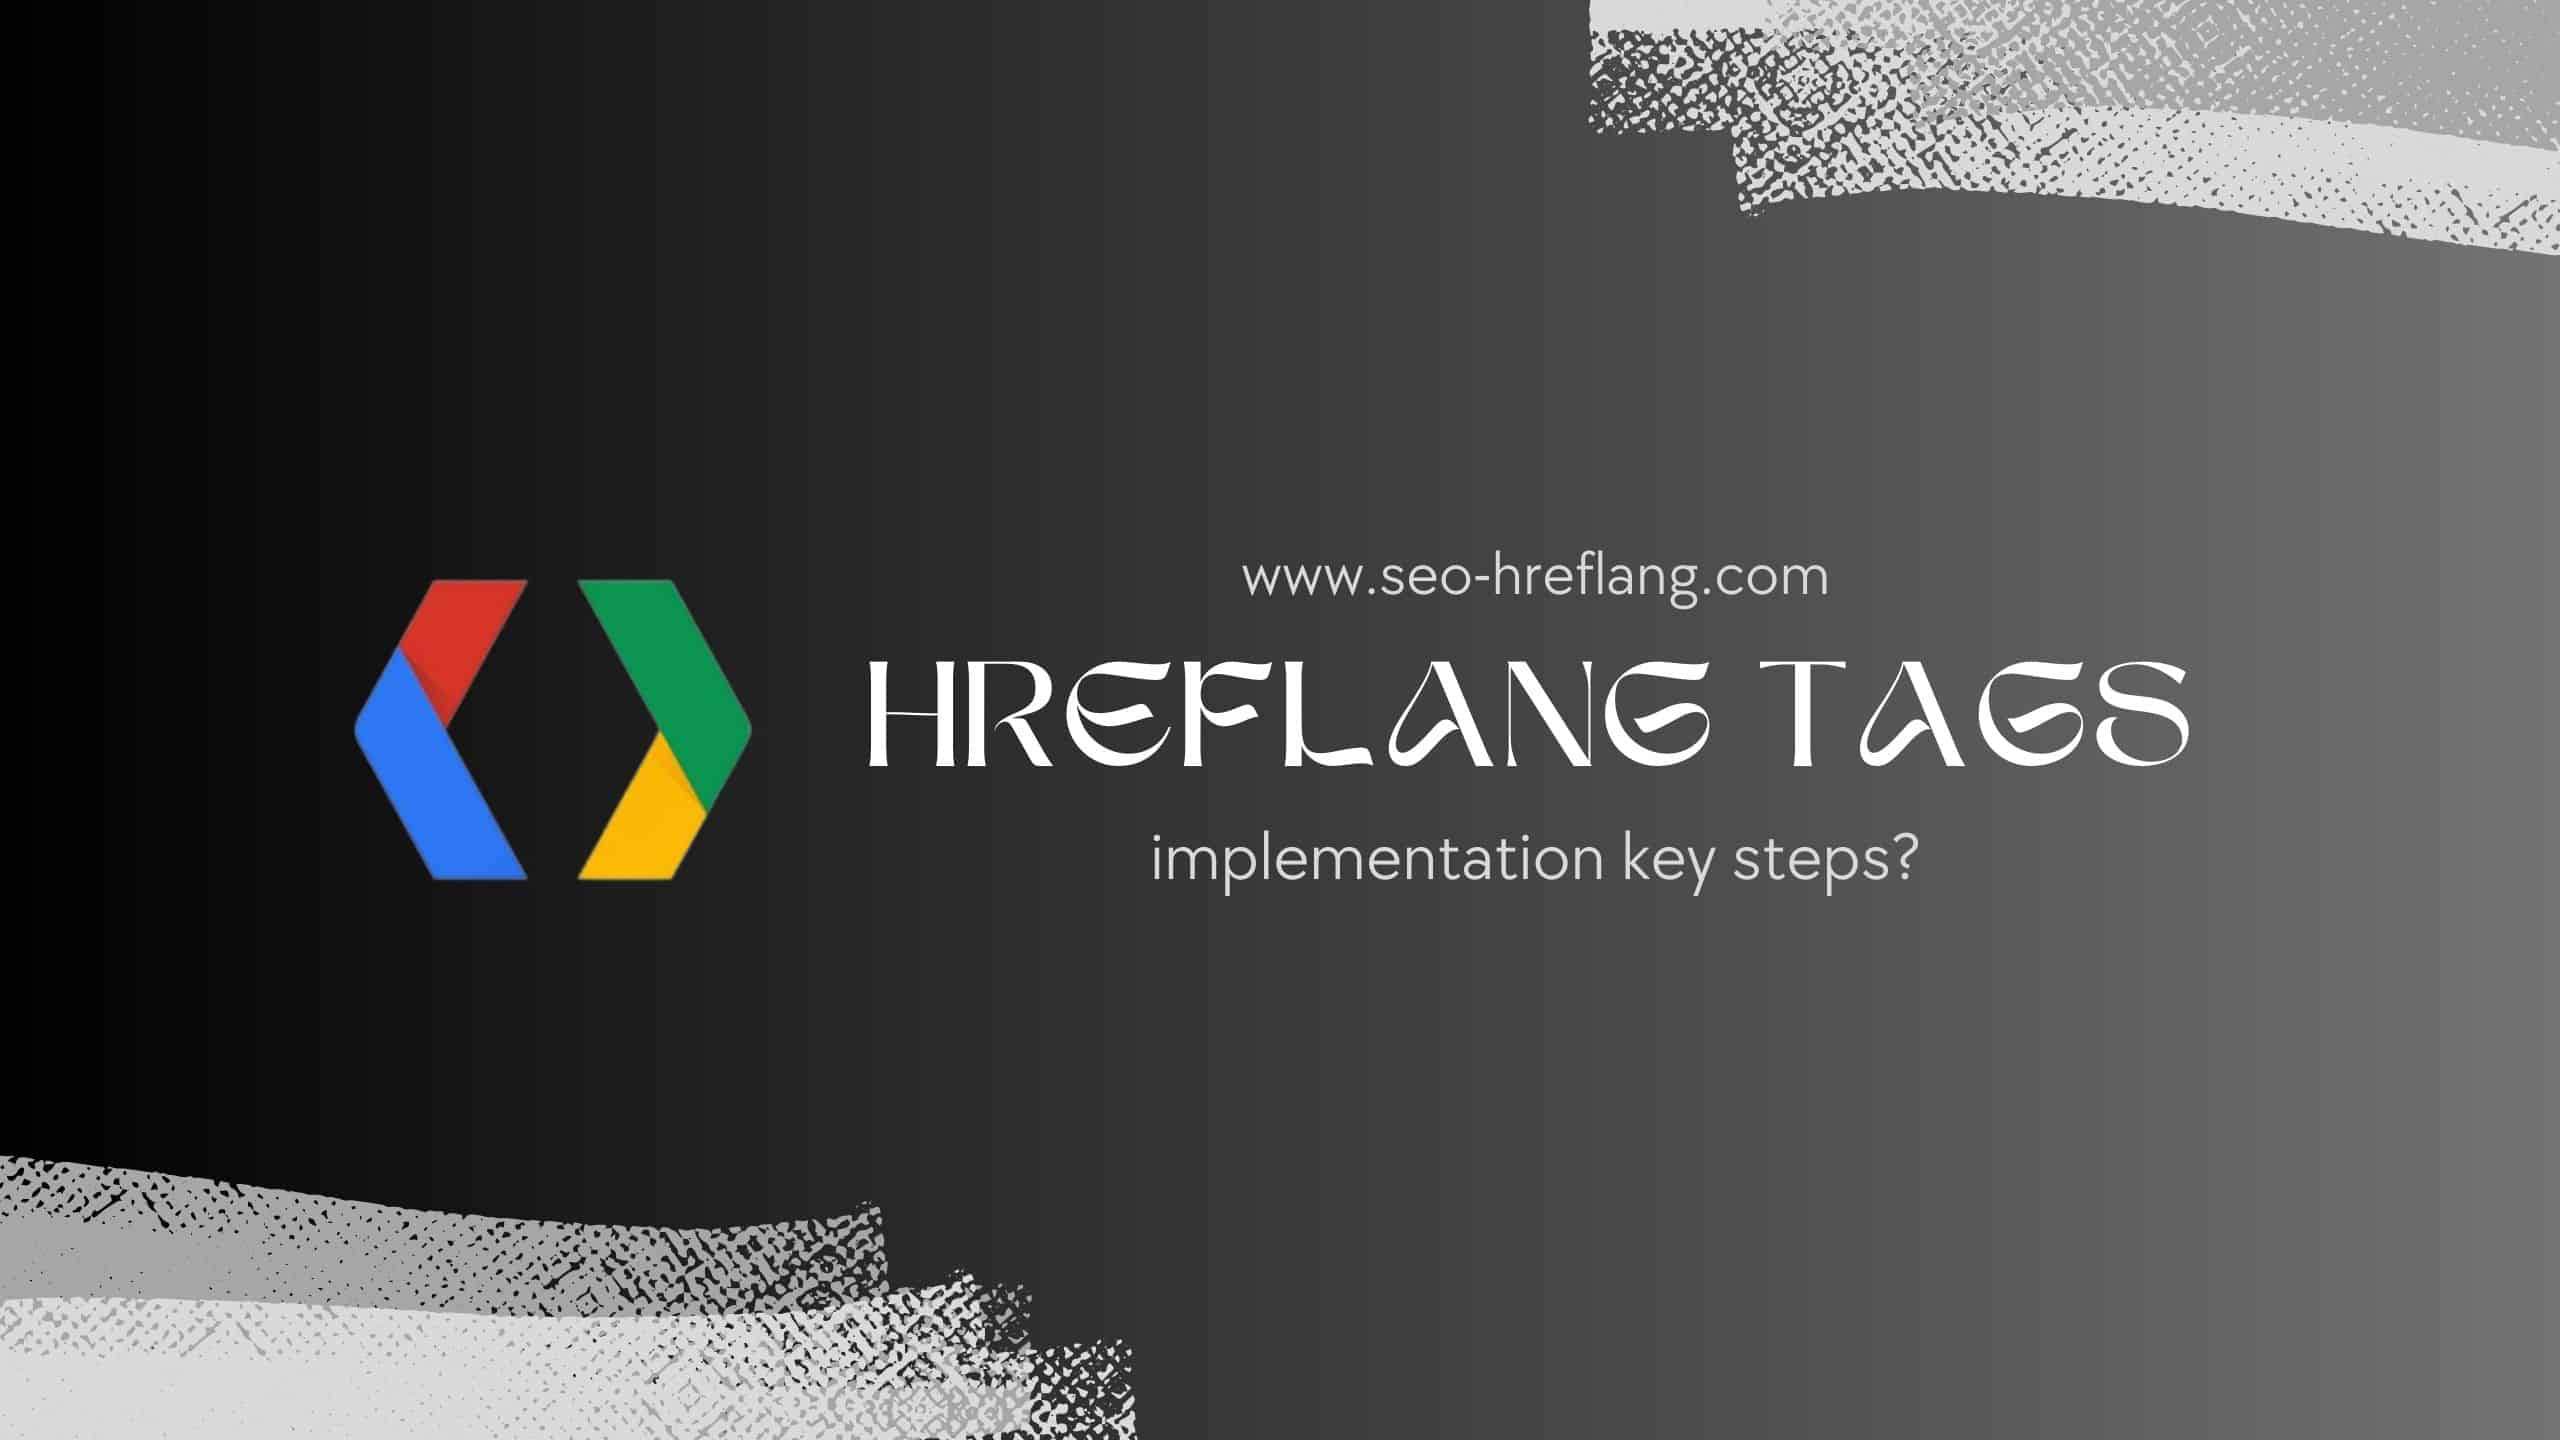 Hreflang implementation key steps? (2023),how to add hreflang tags in wordpress, How to Implement Hreflang Tags, href tag example, hreflang, hreflang attributes, hreflang checker, hreflang code, hreflang code list, hreflang example, hreflang explained, hreflang html, hreflang implementation, hreflang implementation google, hreflang implementation in sitemap, hreflang in SEO, hreflang spanish, hreflang tag, hreflang tag for english in australia, hreflang tag for english in england, hreflang tag implementation, hreflang tag in html, hreflang tag seo, Hreflang Tags, hreflang tags example, hreflang tags generator tool, hreflang tags generator tools, hreflang tags google, hreflang tags implement, hreflang tags implementation, hreflang tags lite, hreflang tags meaning, hreflang tags shopify, hreflang tags testing tool, hreflang tags wordpress, hreflang x-default, implementation details example, SEOhareflang, what is hreflang tags, wordpress hreflang